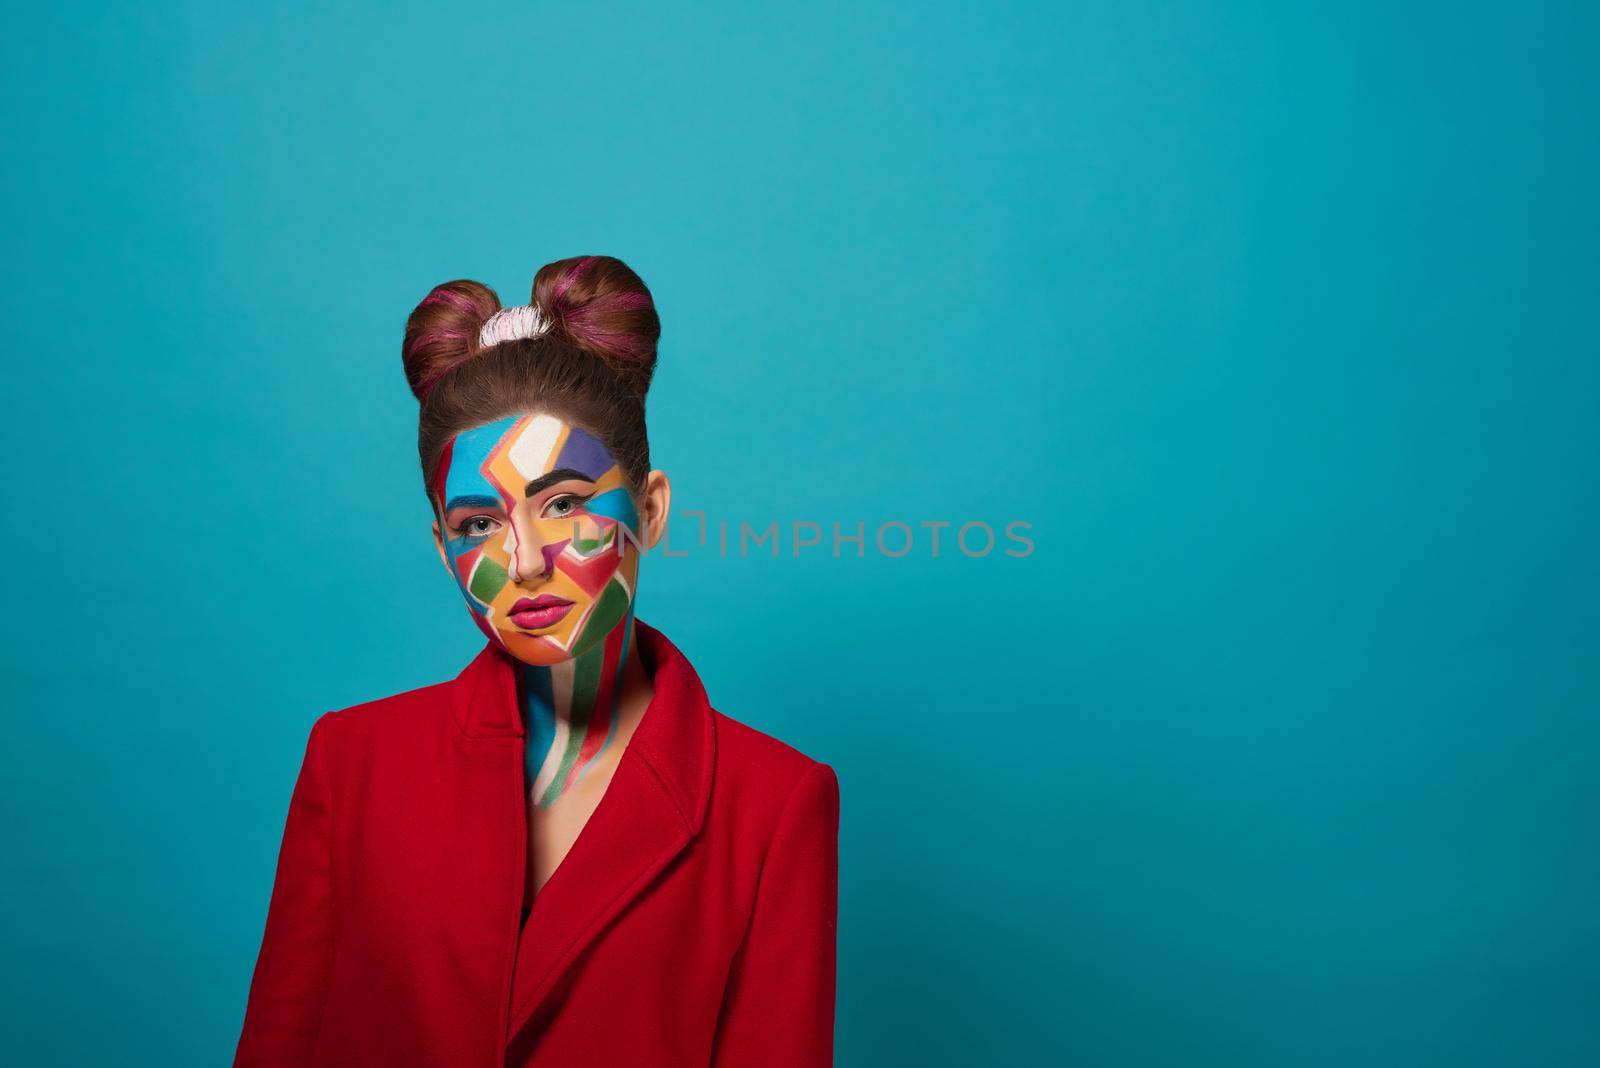 Stylish, trendy model wearing in red jacket, posing in studio with blue background. Cool girl has creative pop art make up on face and nice bow hairstyle. Funky lady looking at camera, posing.